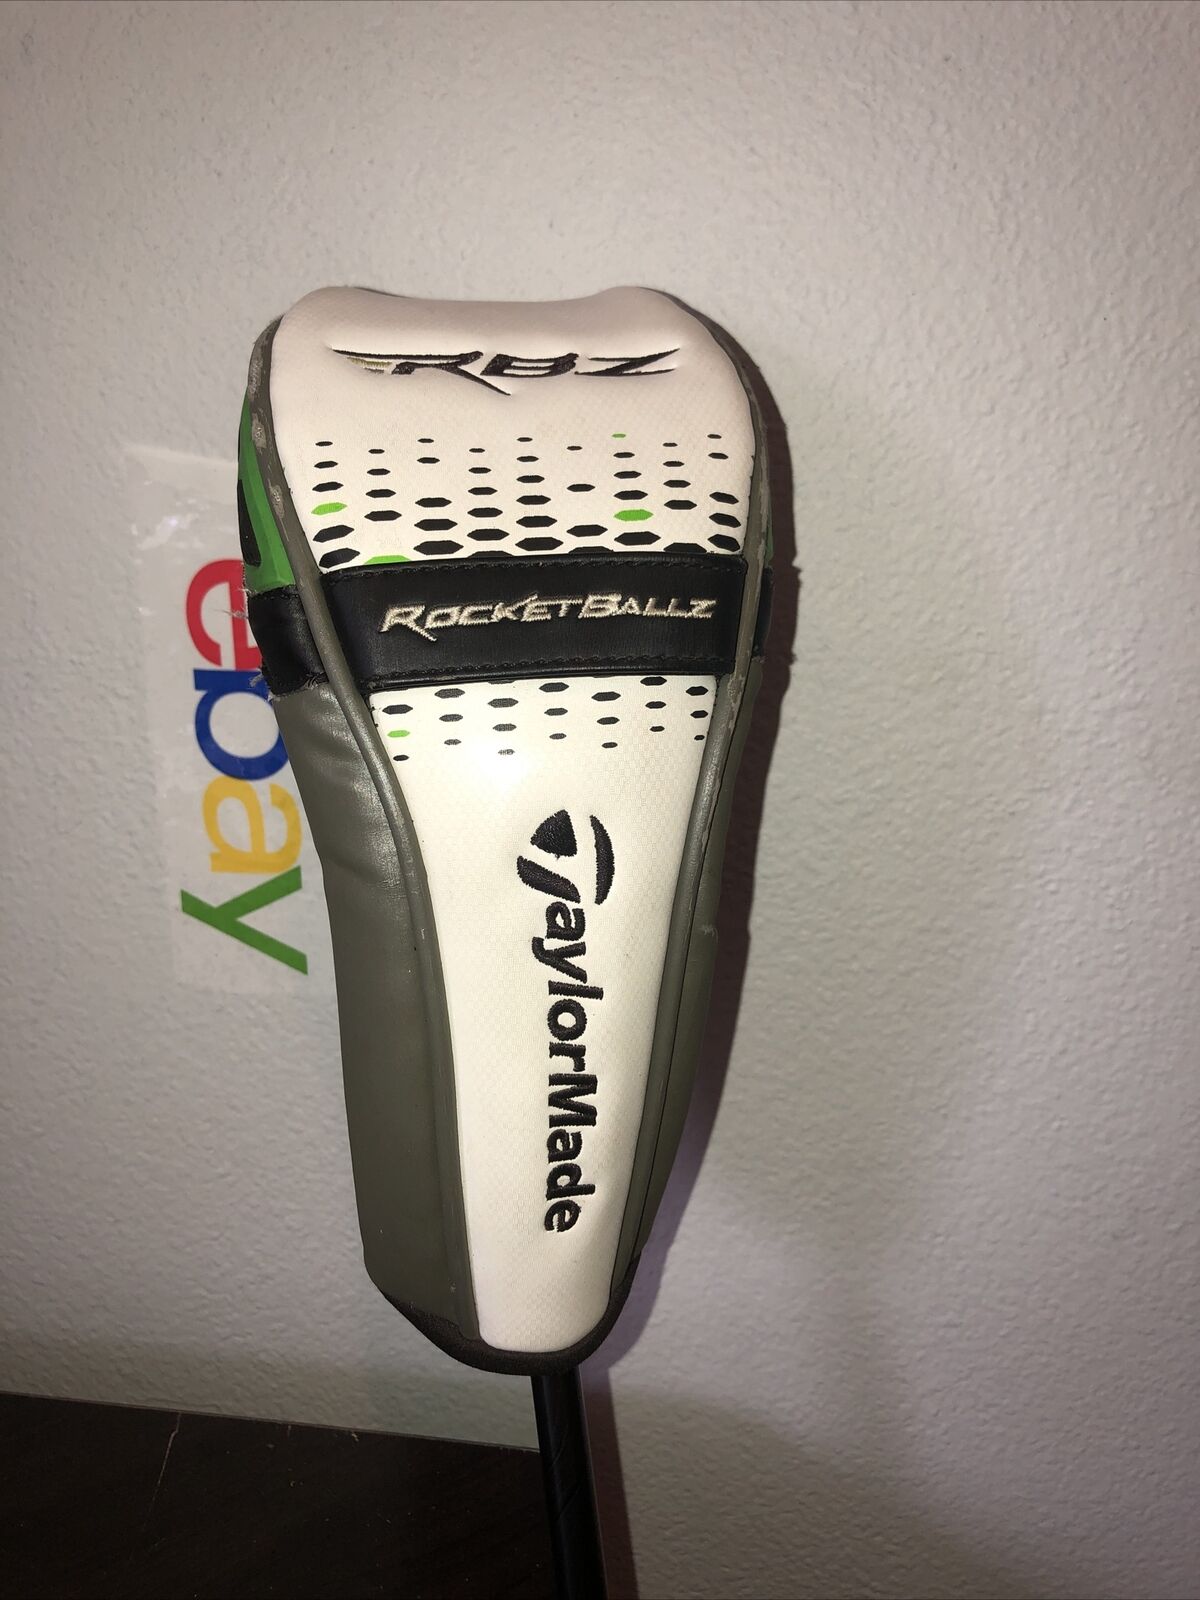 TAYLORMADE RBZ ROCKETBALLZ HYBRID RESCUE HEADCOVER White Head Cover w Tag (26)